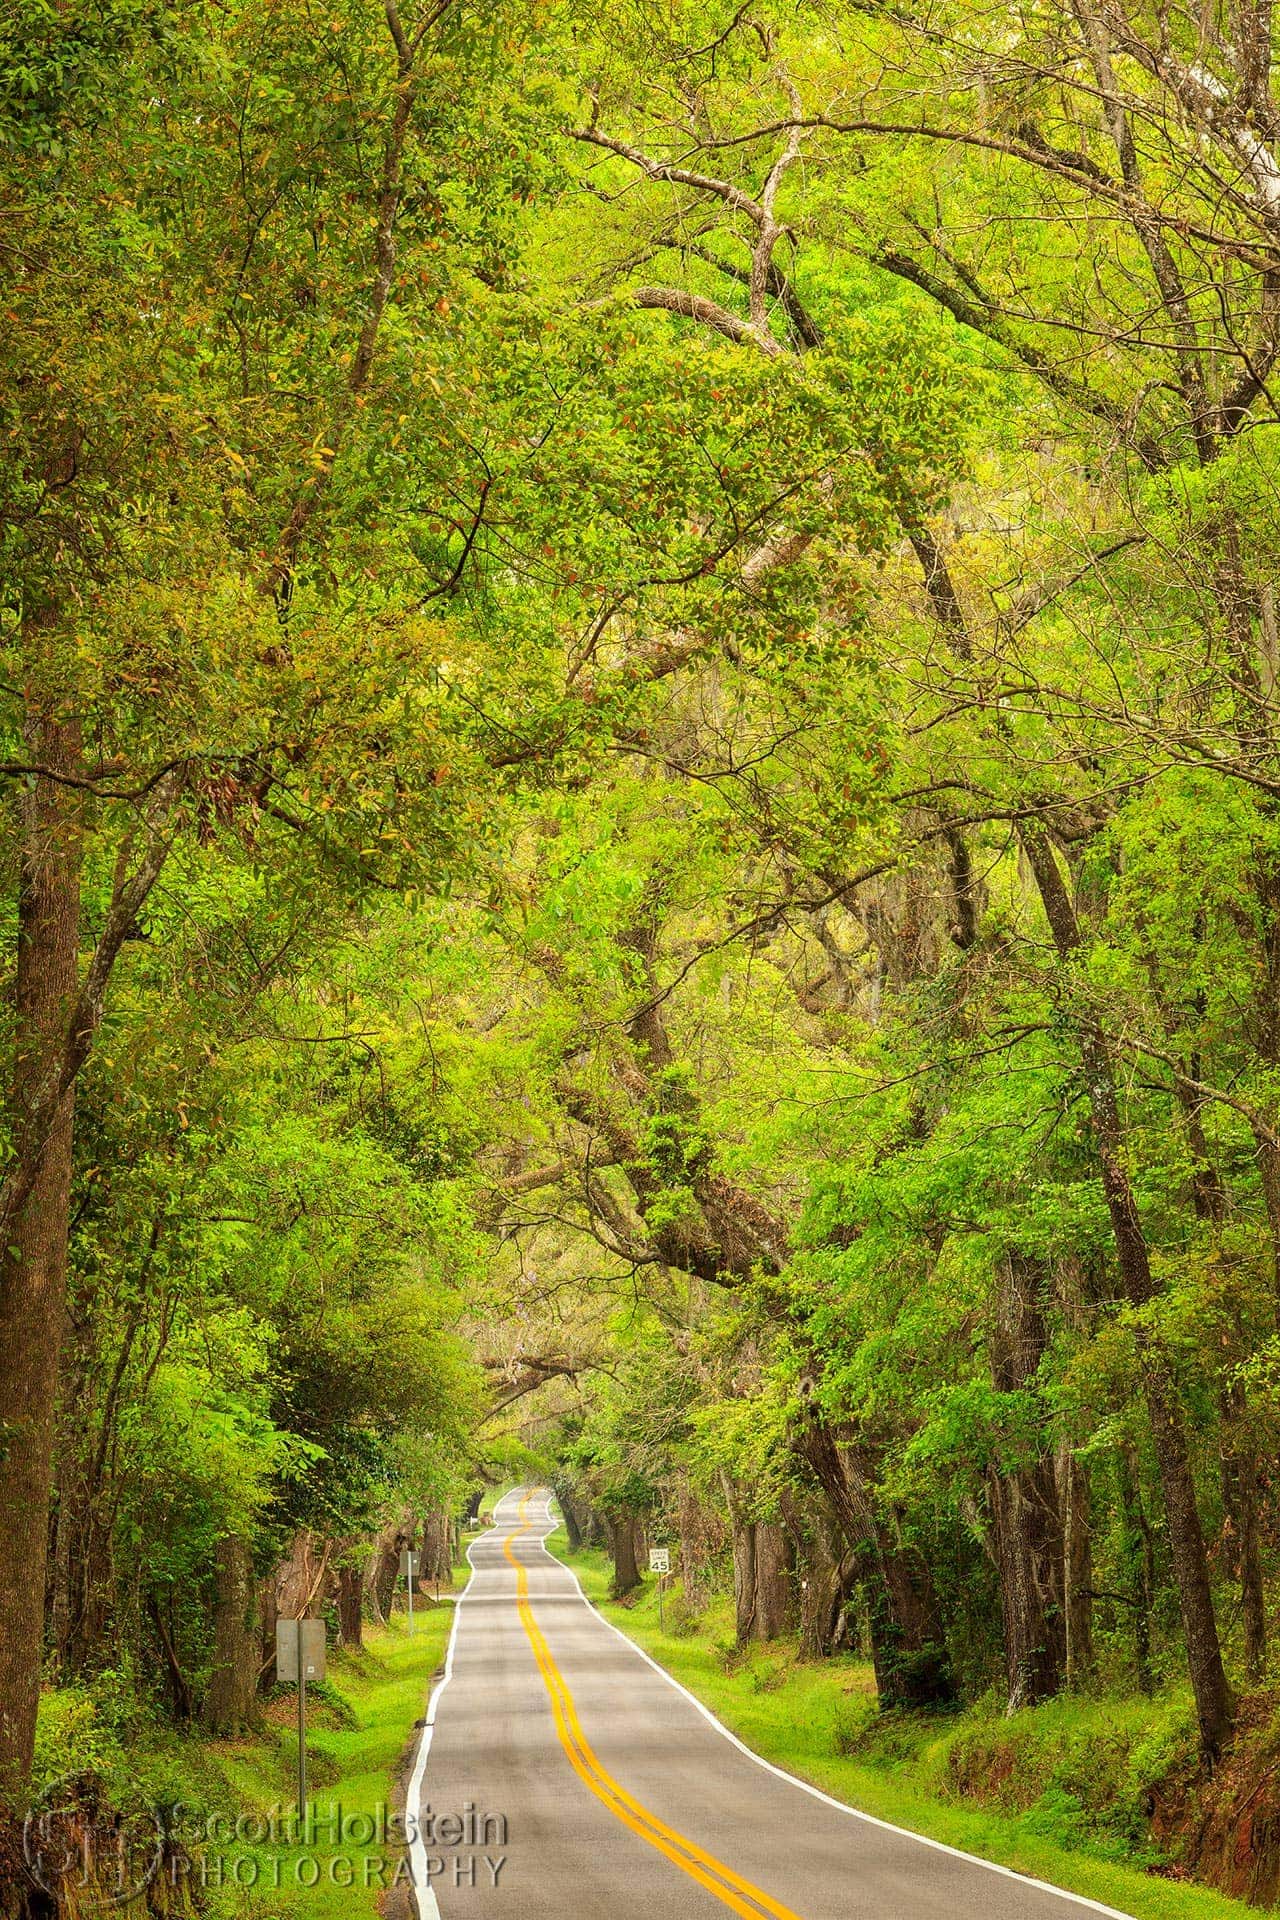 A view down Miccosukee Road in the springtime shows how this canopy road is one of the best scenic drives in Tallahassee, Florida.